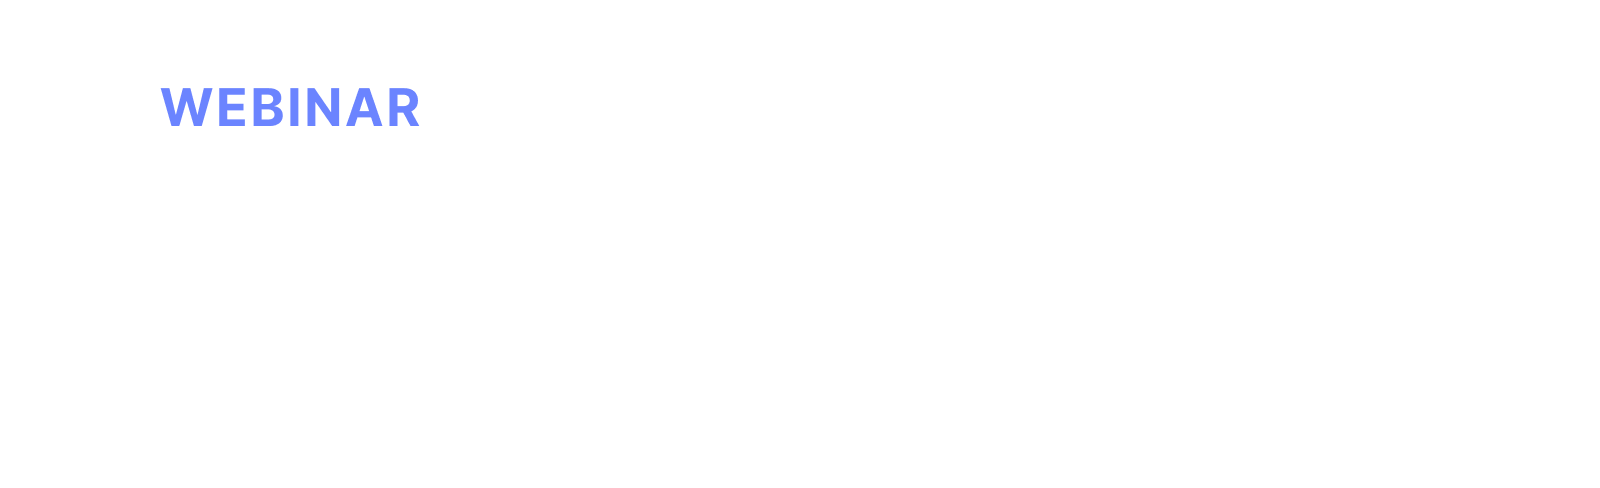 State of Video Live